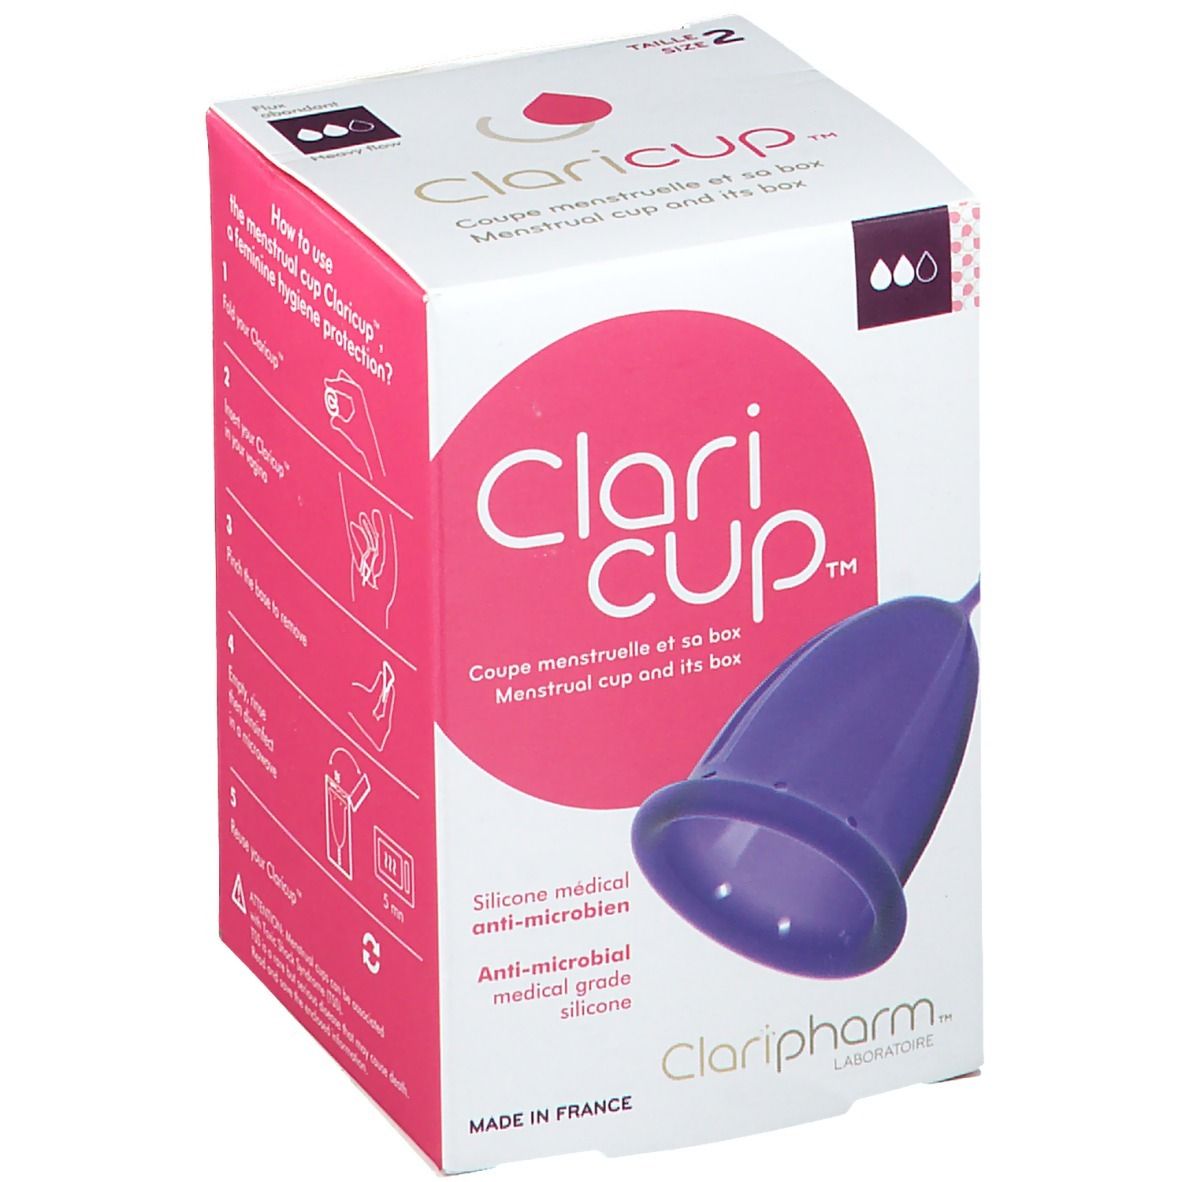 Claripharm Coupe menstruelle Claricup™